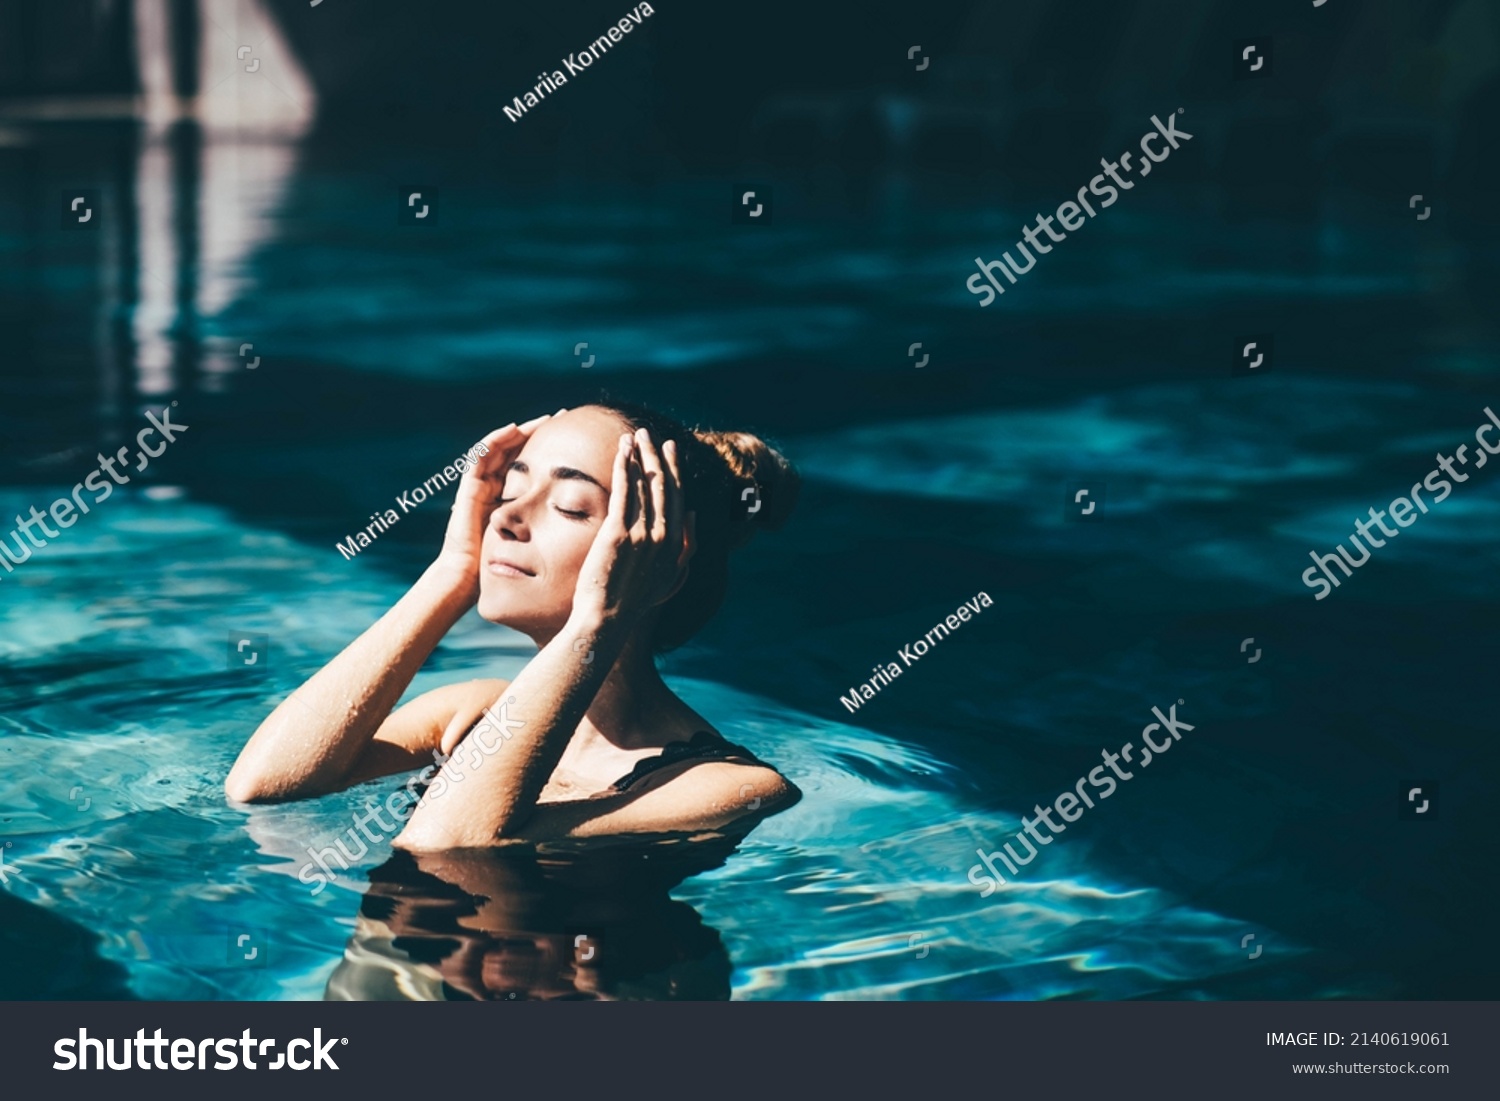 Woman relaxing in the swimming pool. #2140619061